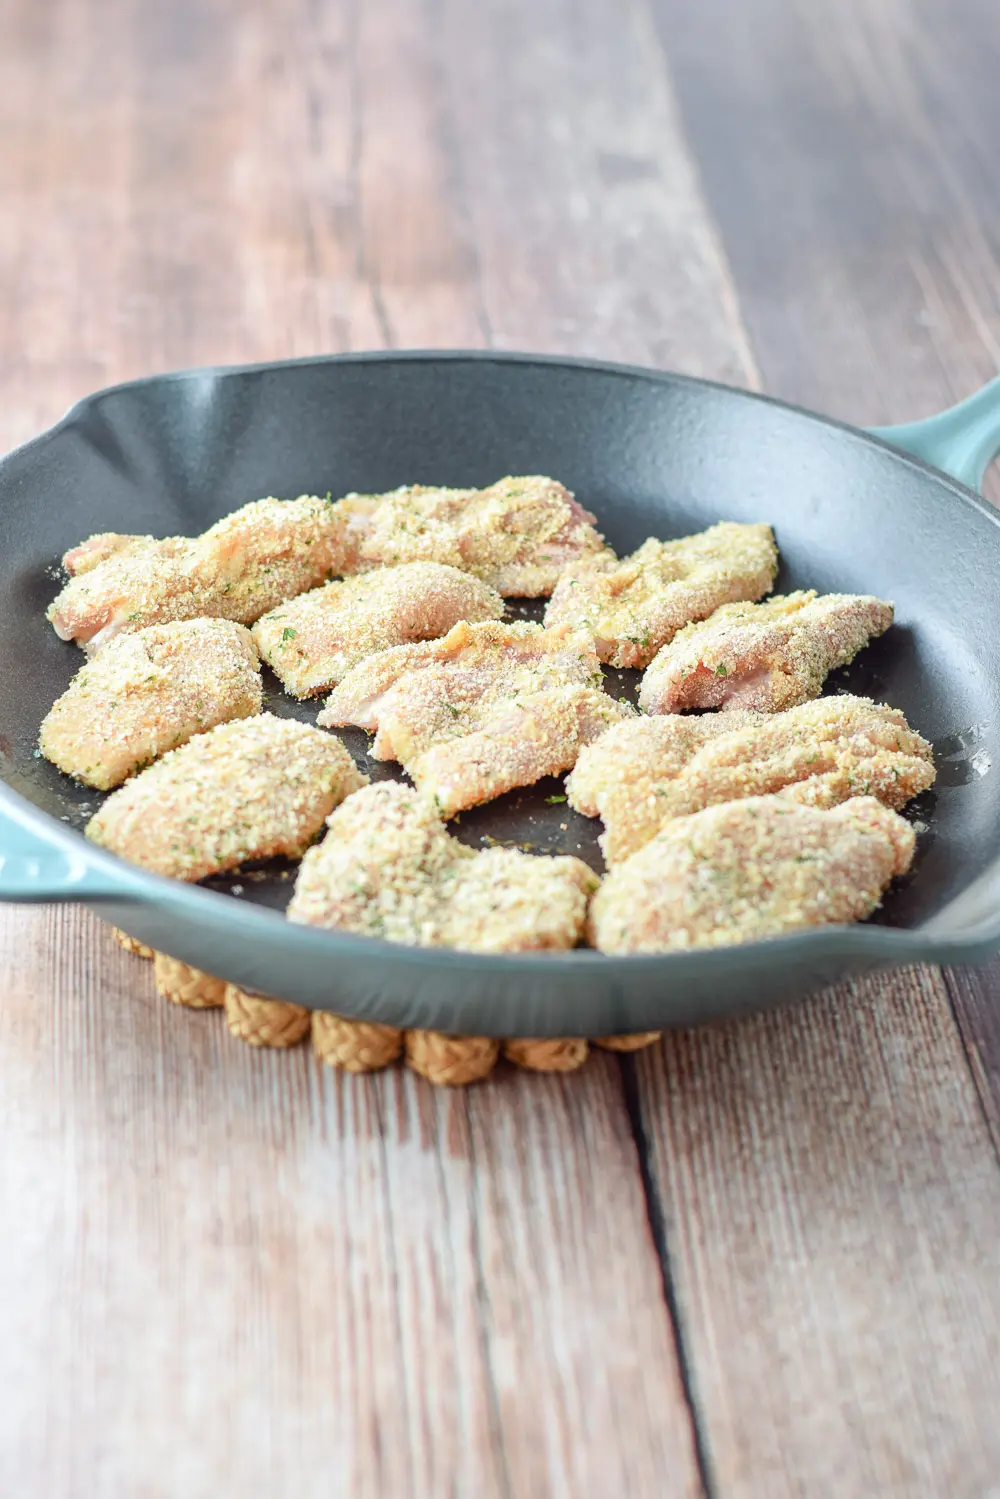 Breaded raw chicken in a cast iron pan